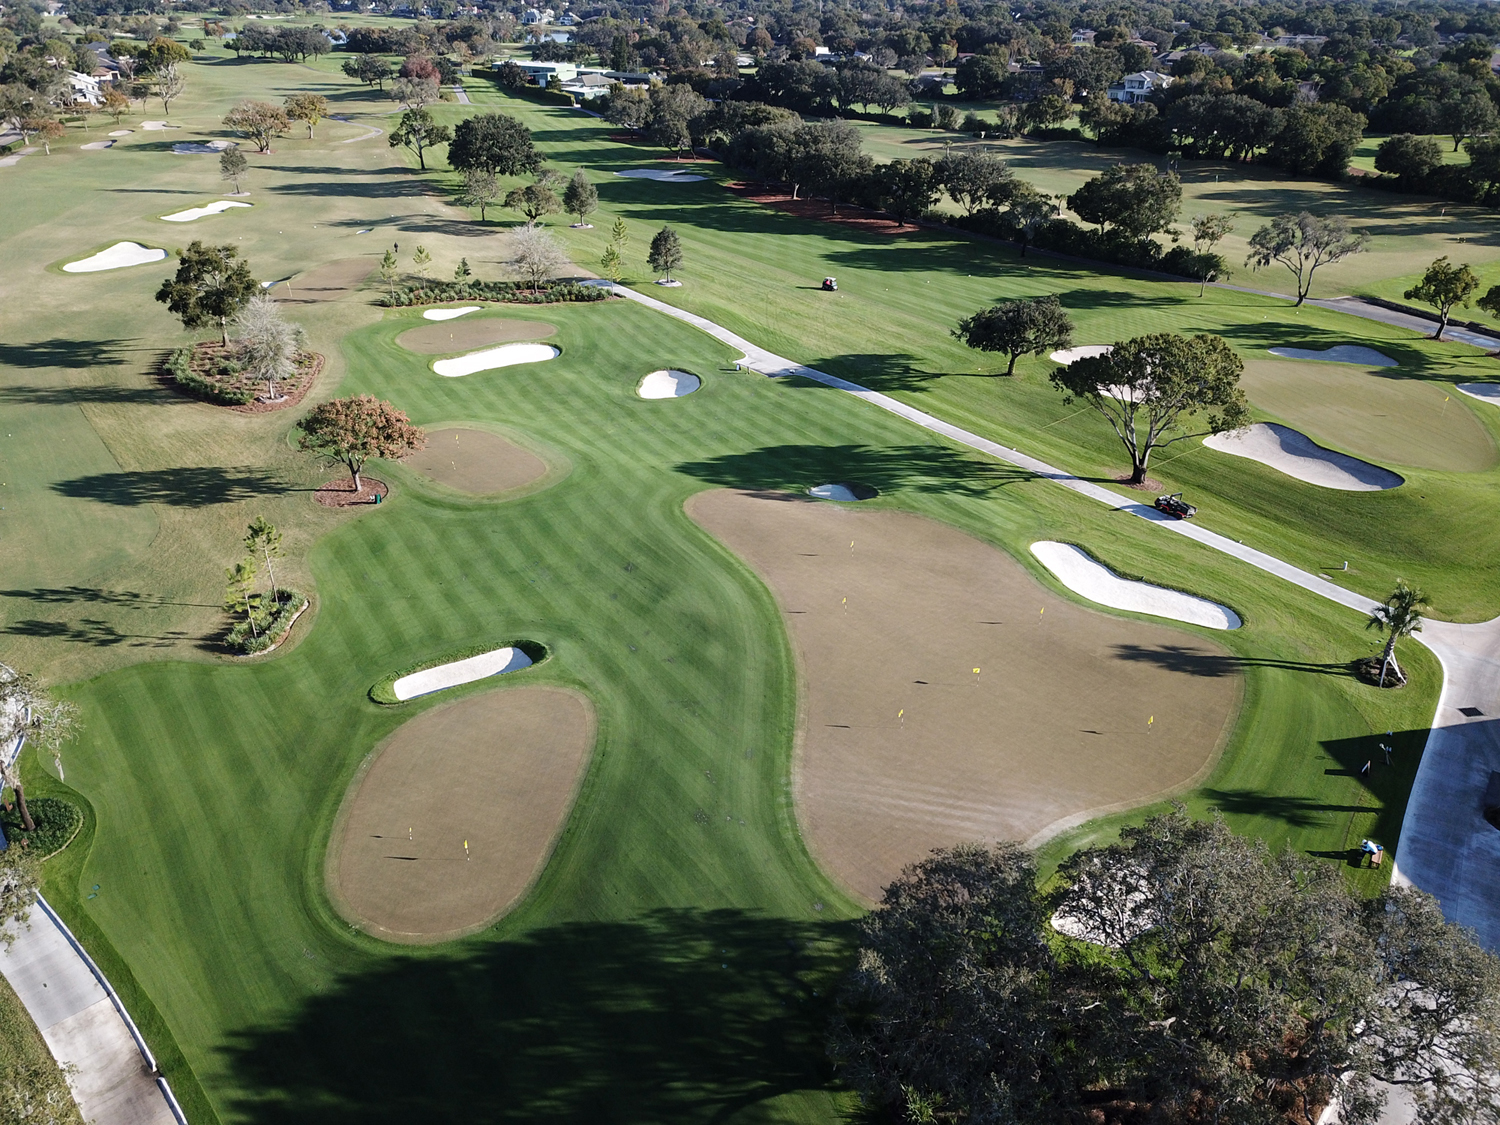 An Upgraded Short Game Area - Taking Bay Hill Club & Lodge into